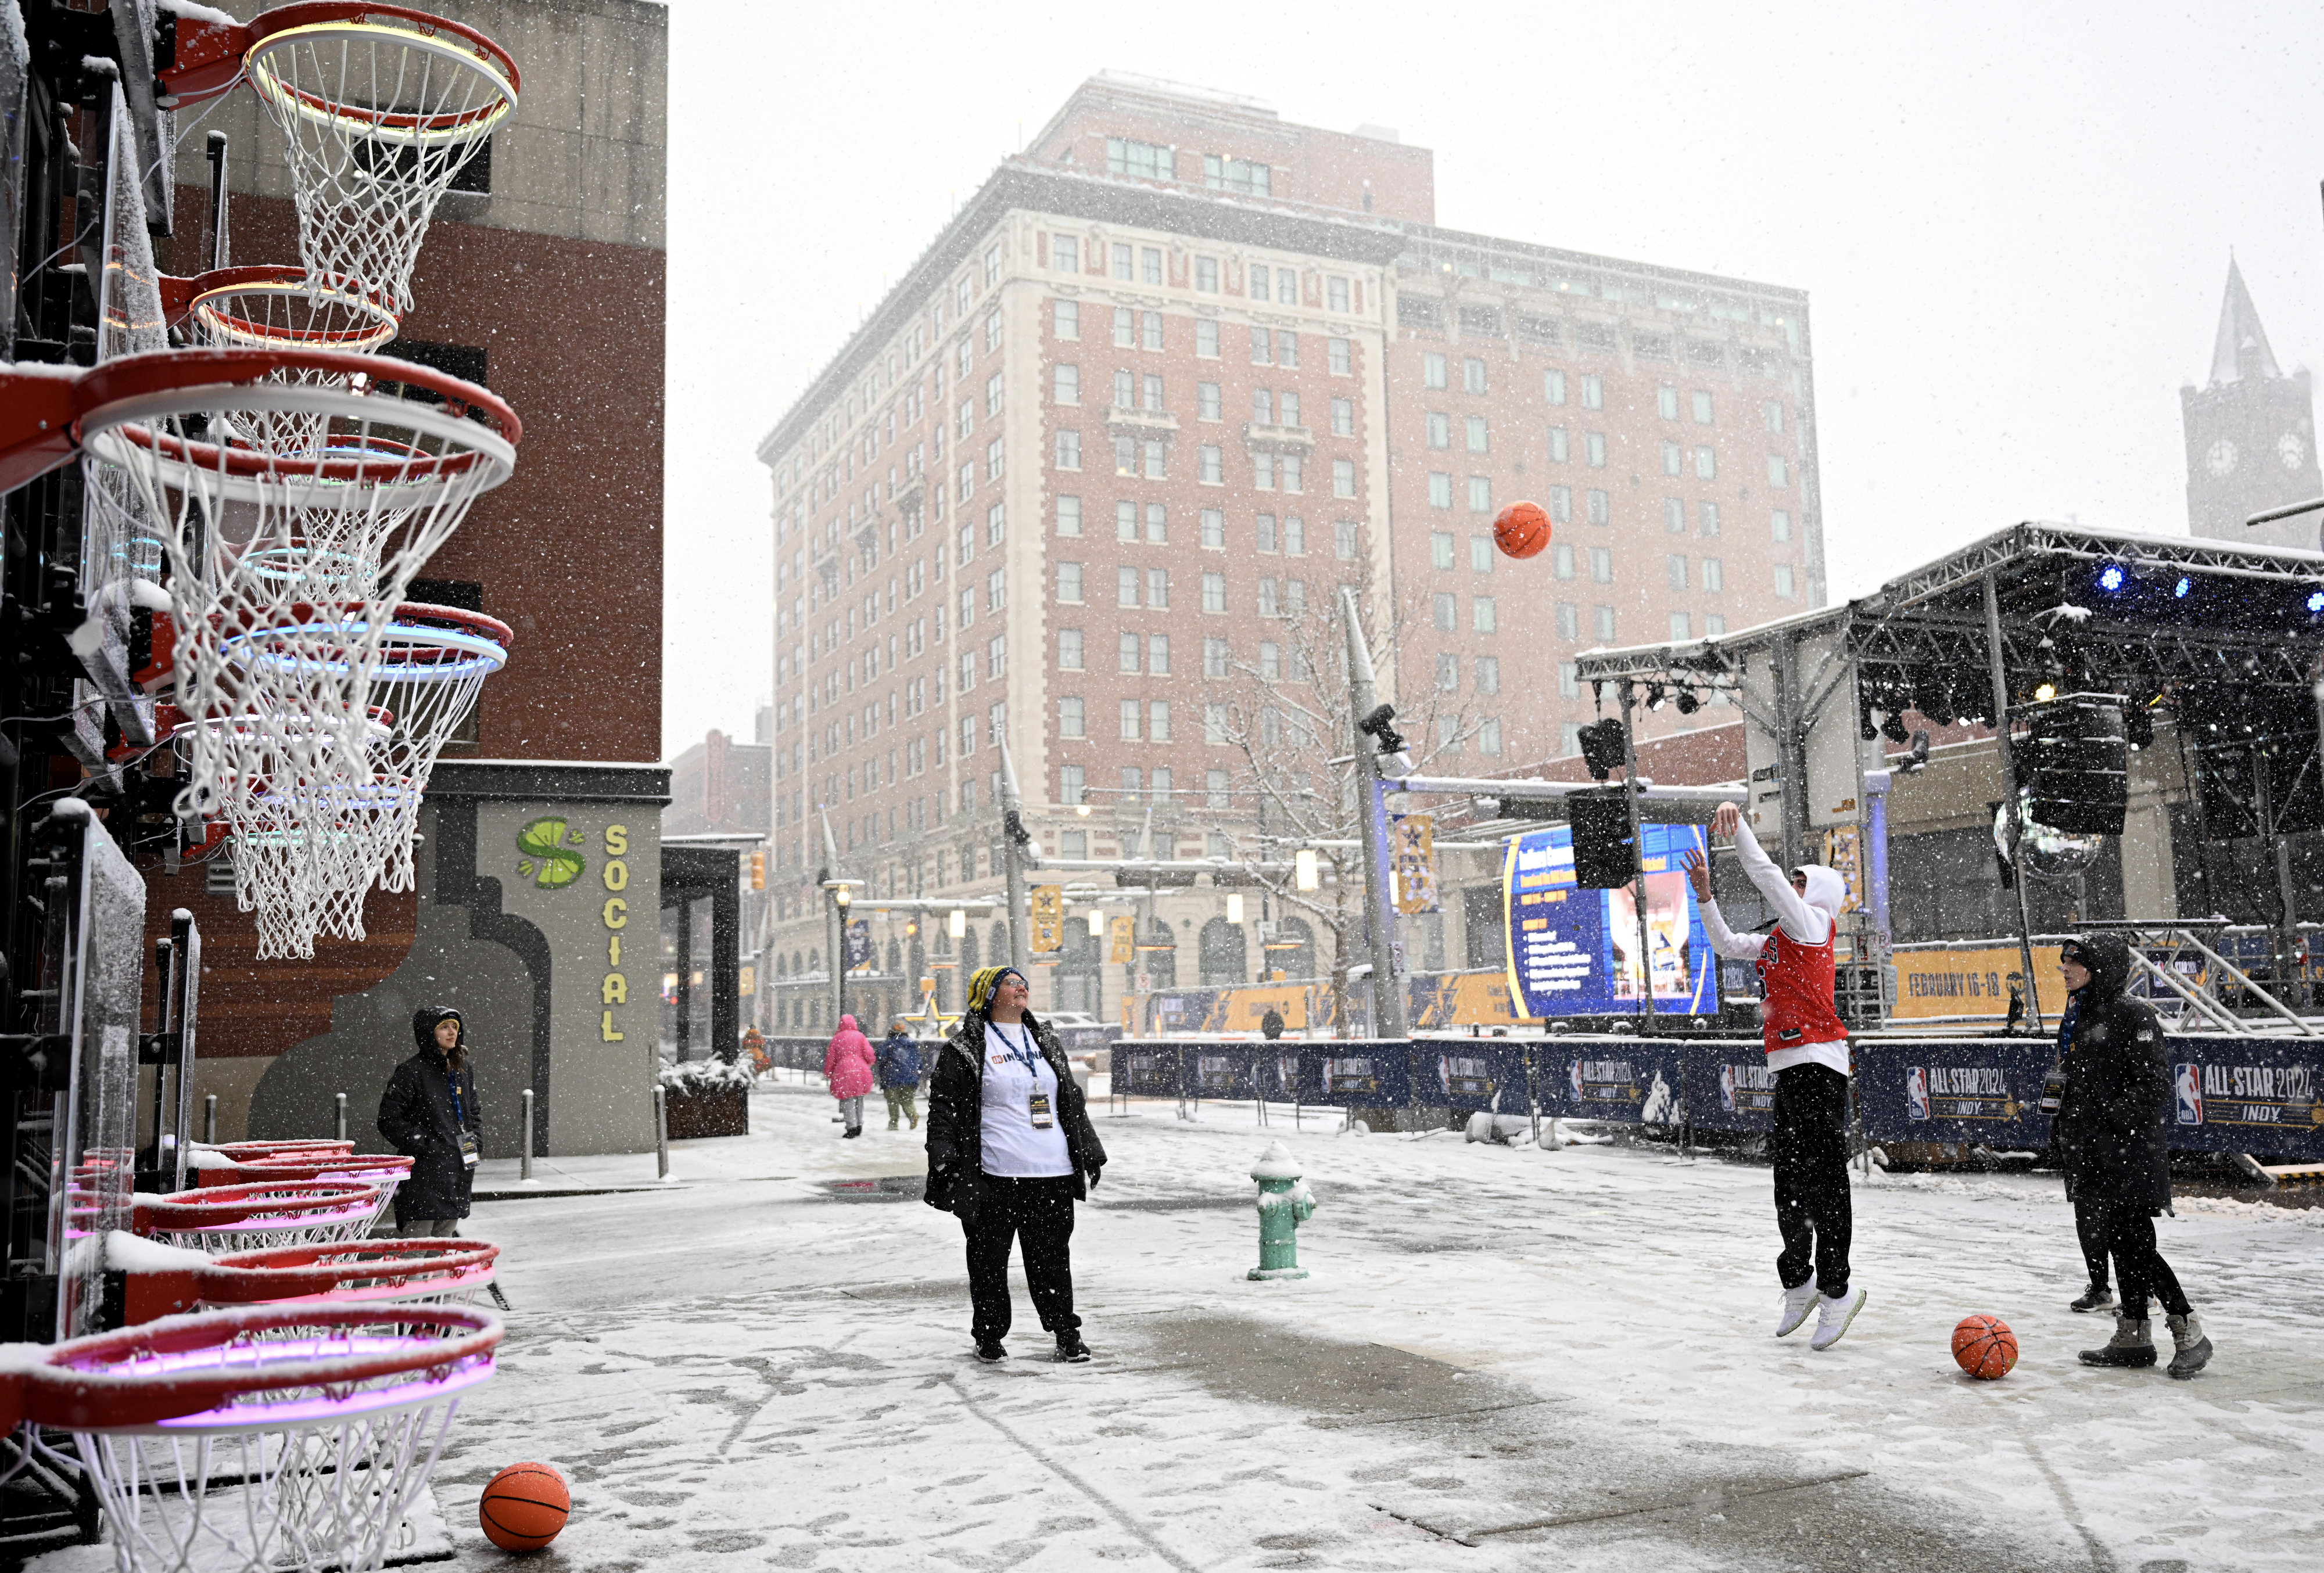 Basketball hoops line a snowy street where people are playing, with buildings and a large digital display in the background